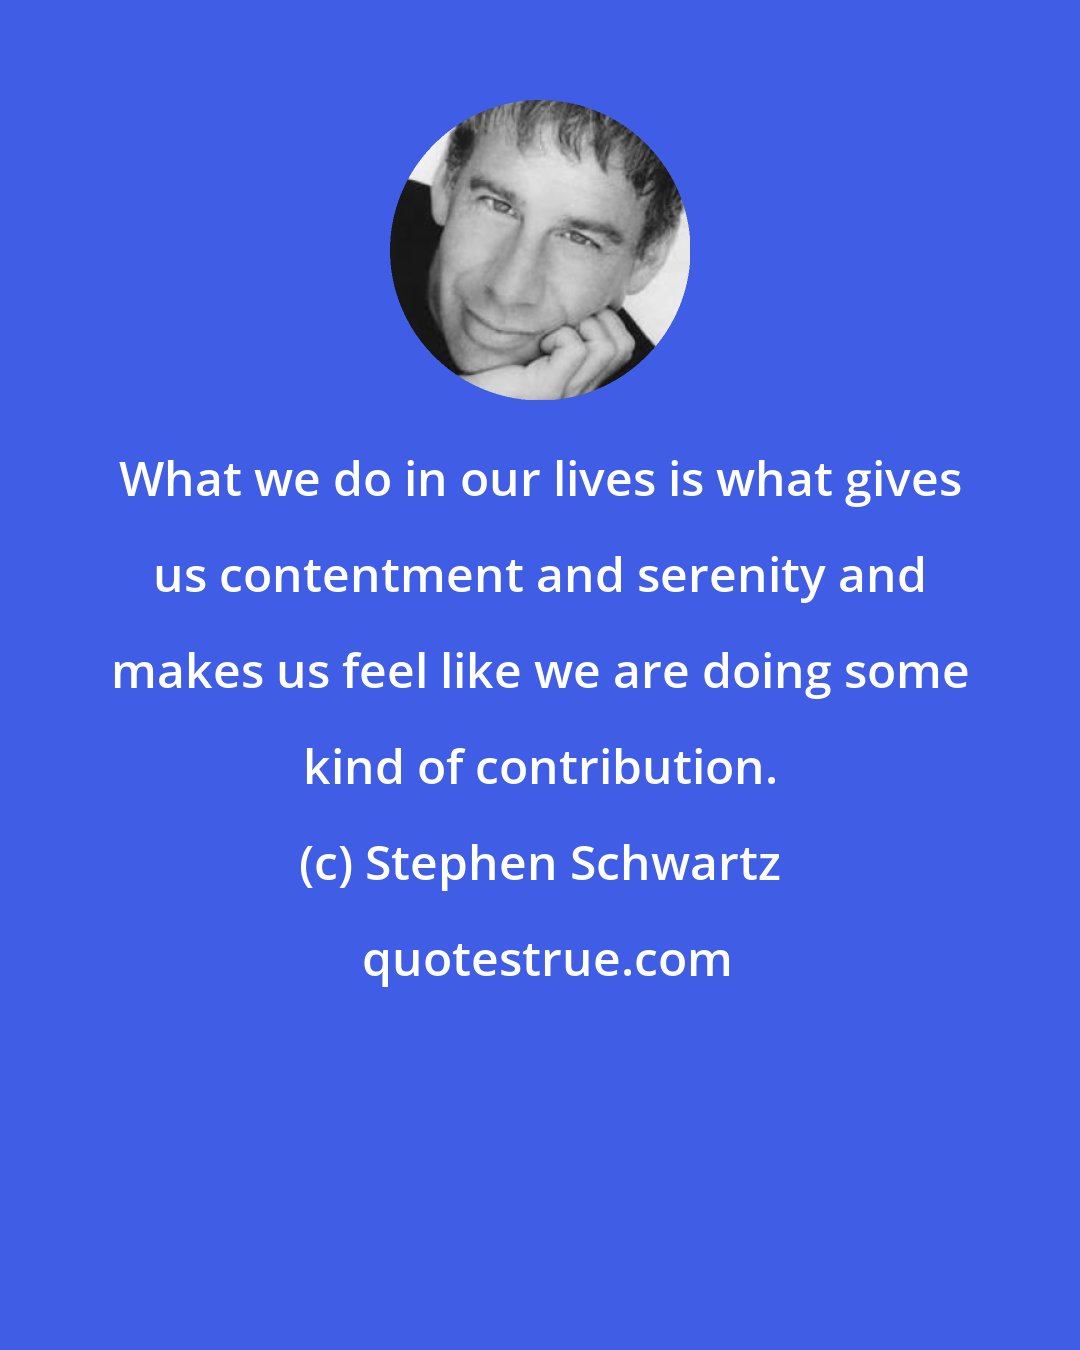 Stephen Schwartz: What we do in our lives is what gives us contentment and serenity and makes us feel like we are doing some kind of contribution.